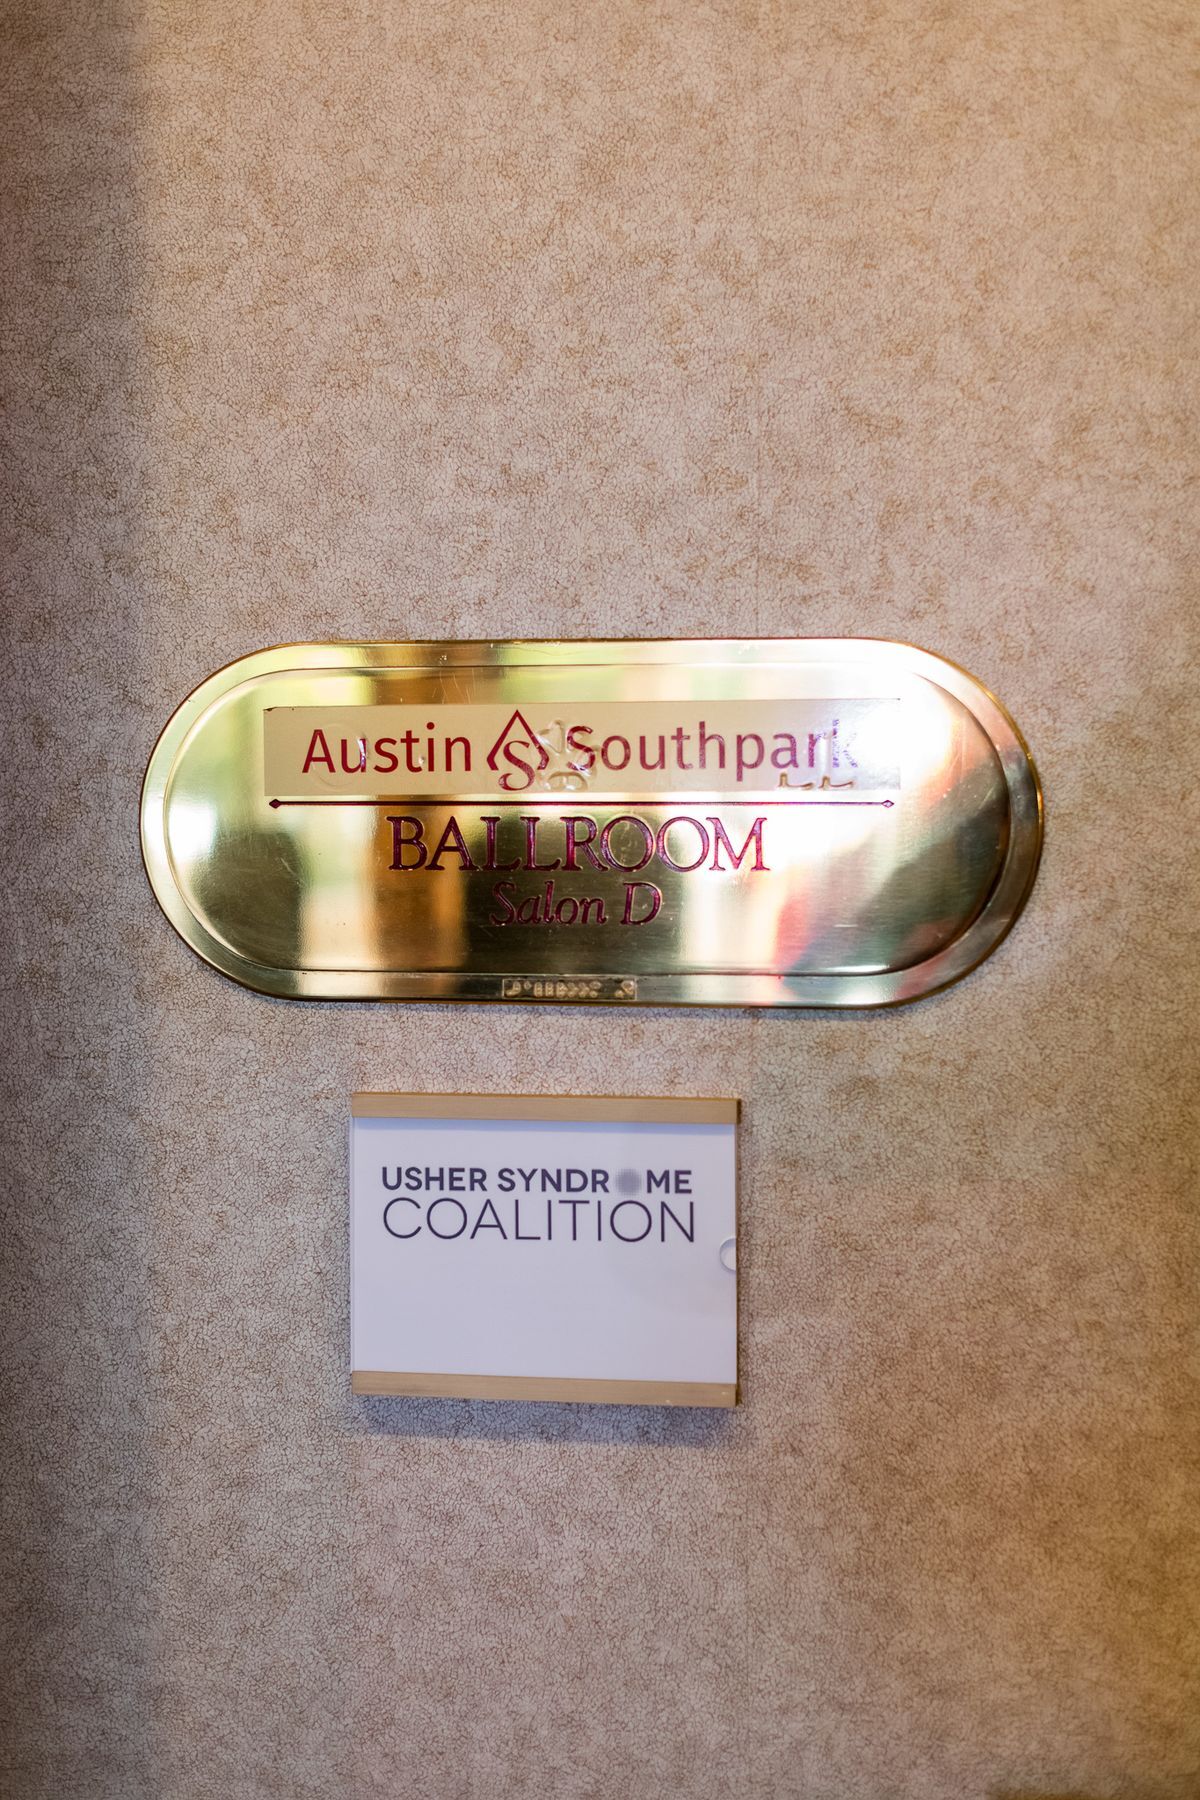 The Usher Syndrome Coalition's logo is seen under the Austin Southpark Ballroom's sign. 